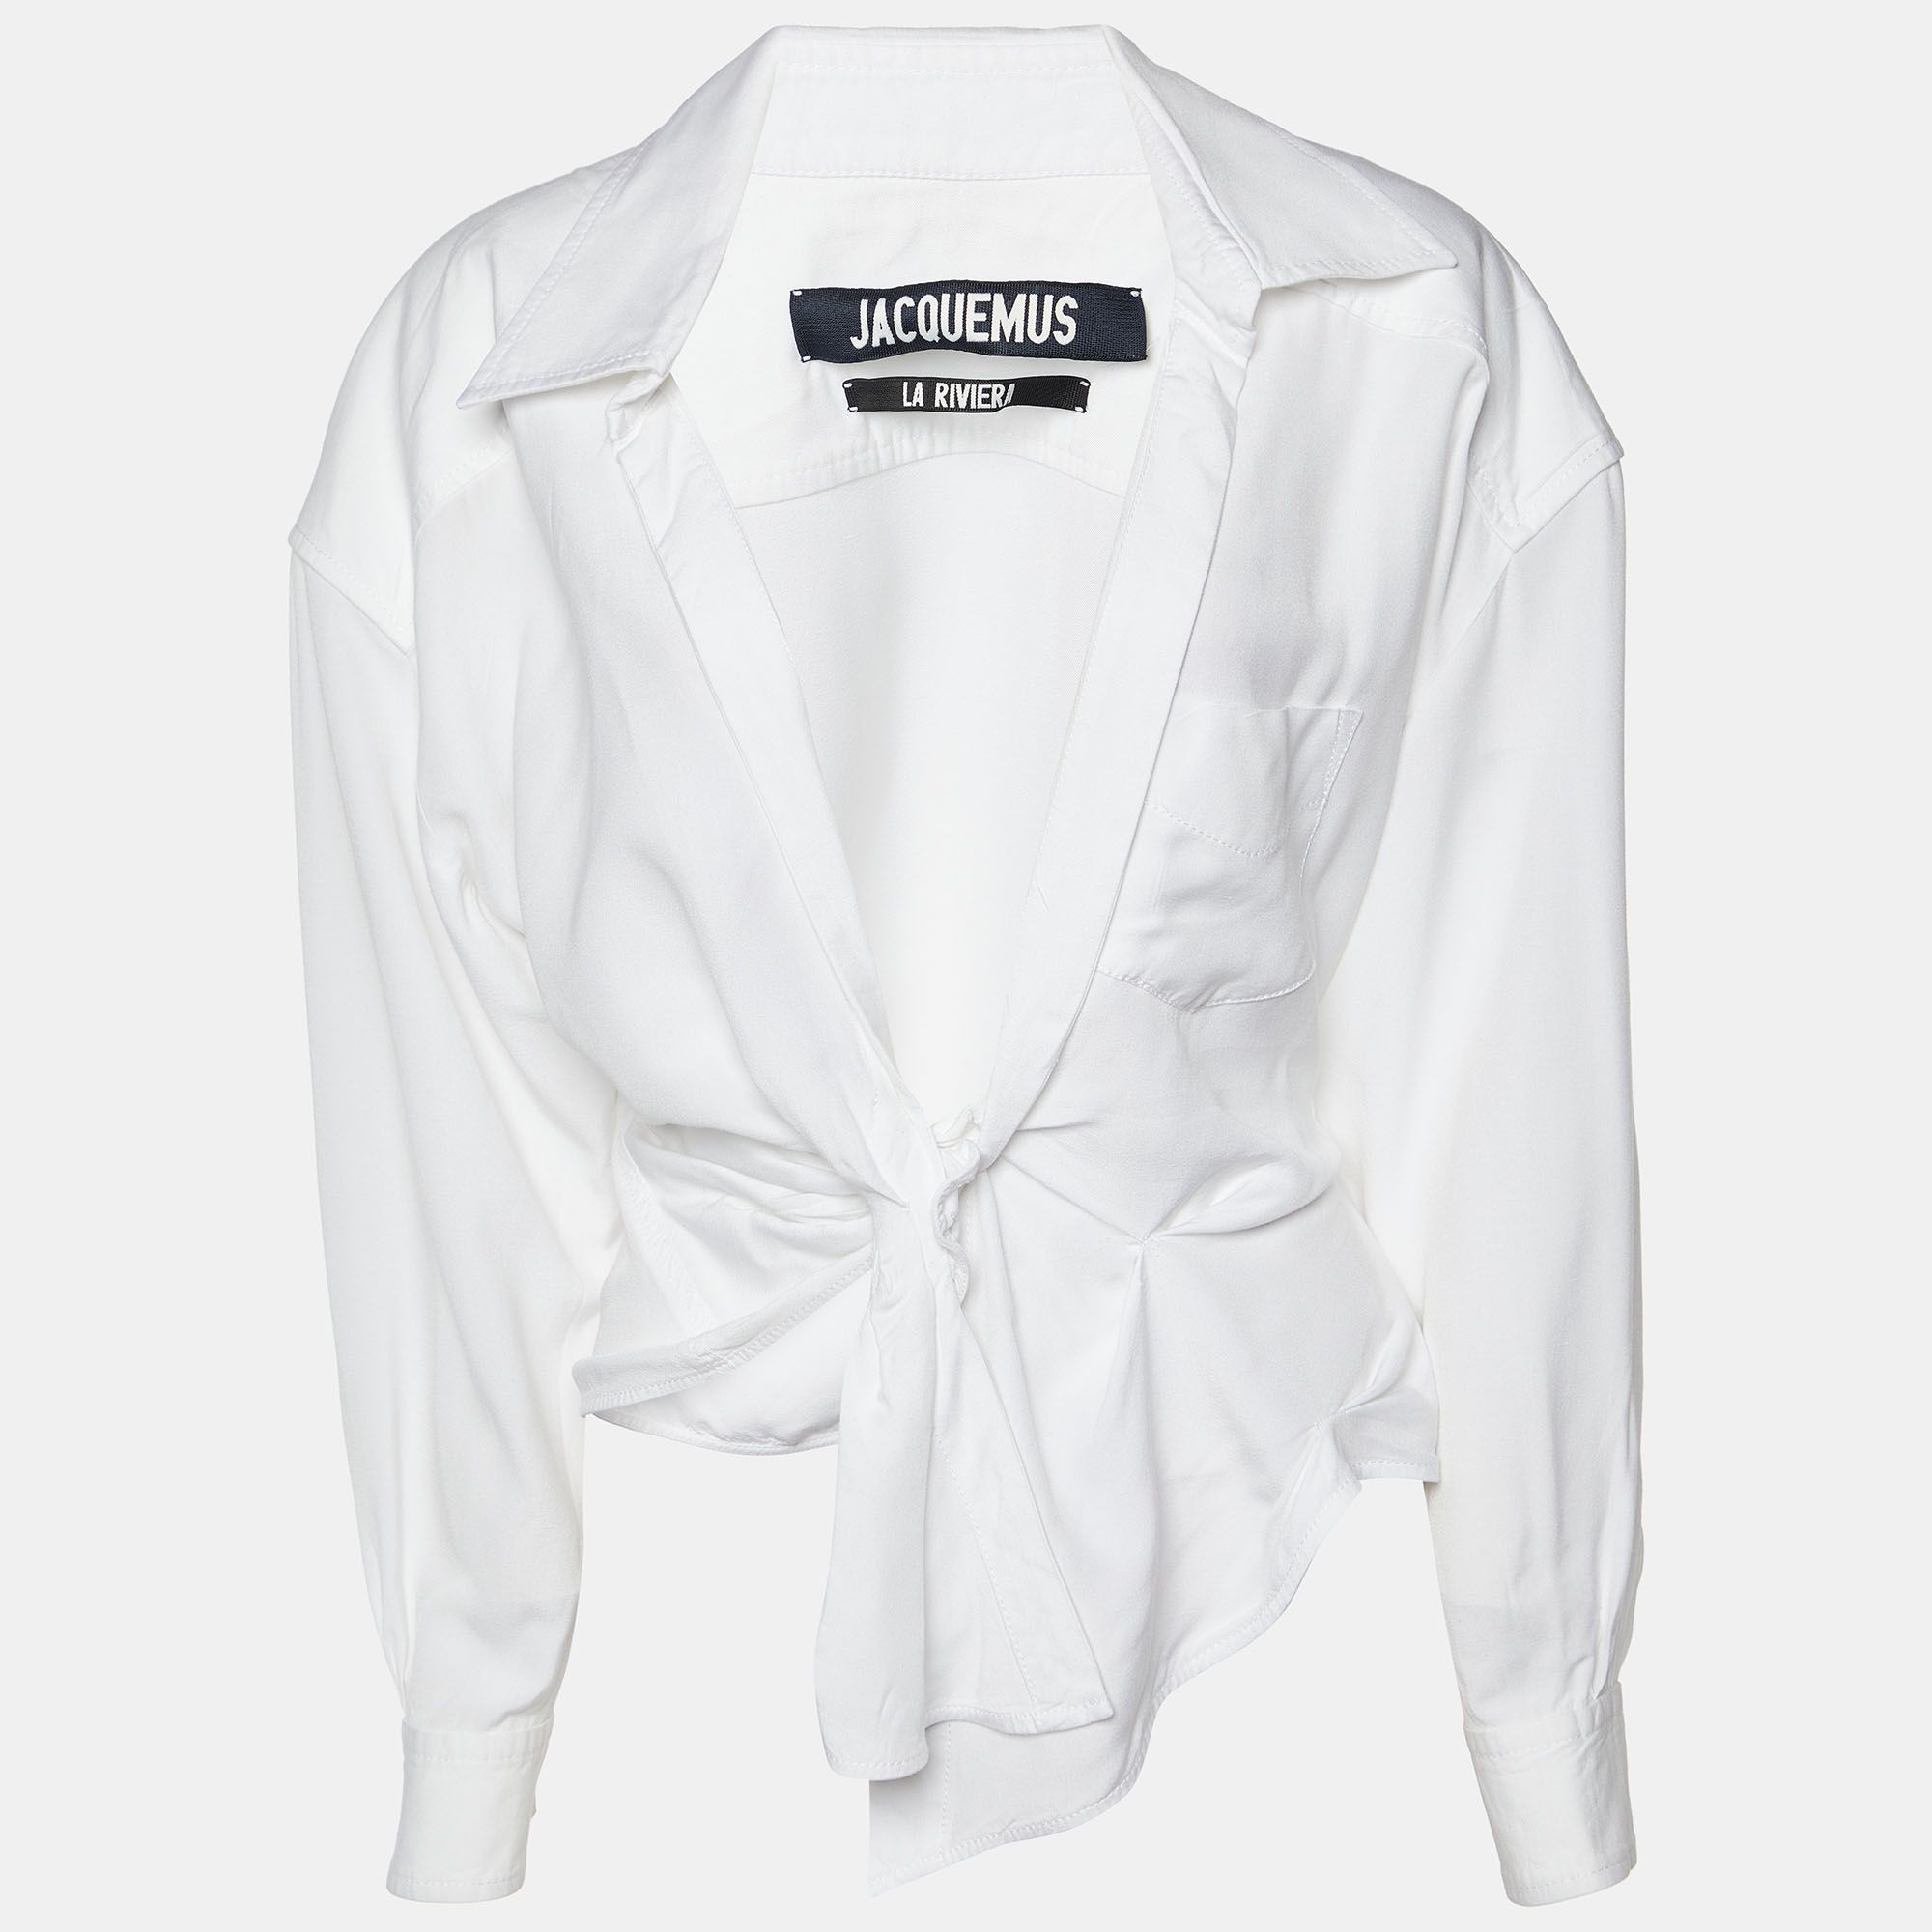 

Jacquemus La Riviera White Tie Front Full Sleeve Cropped Shirt